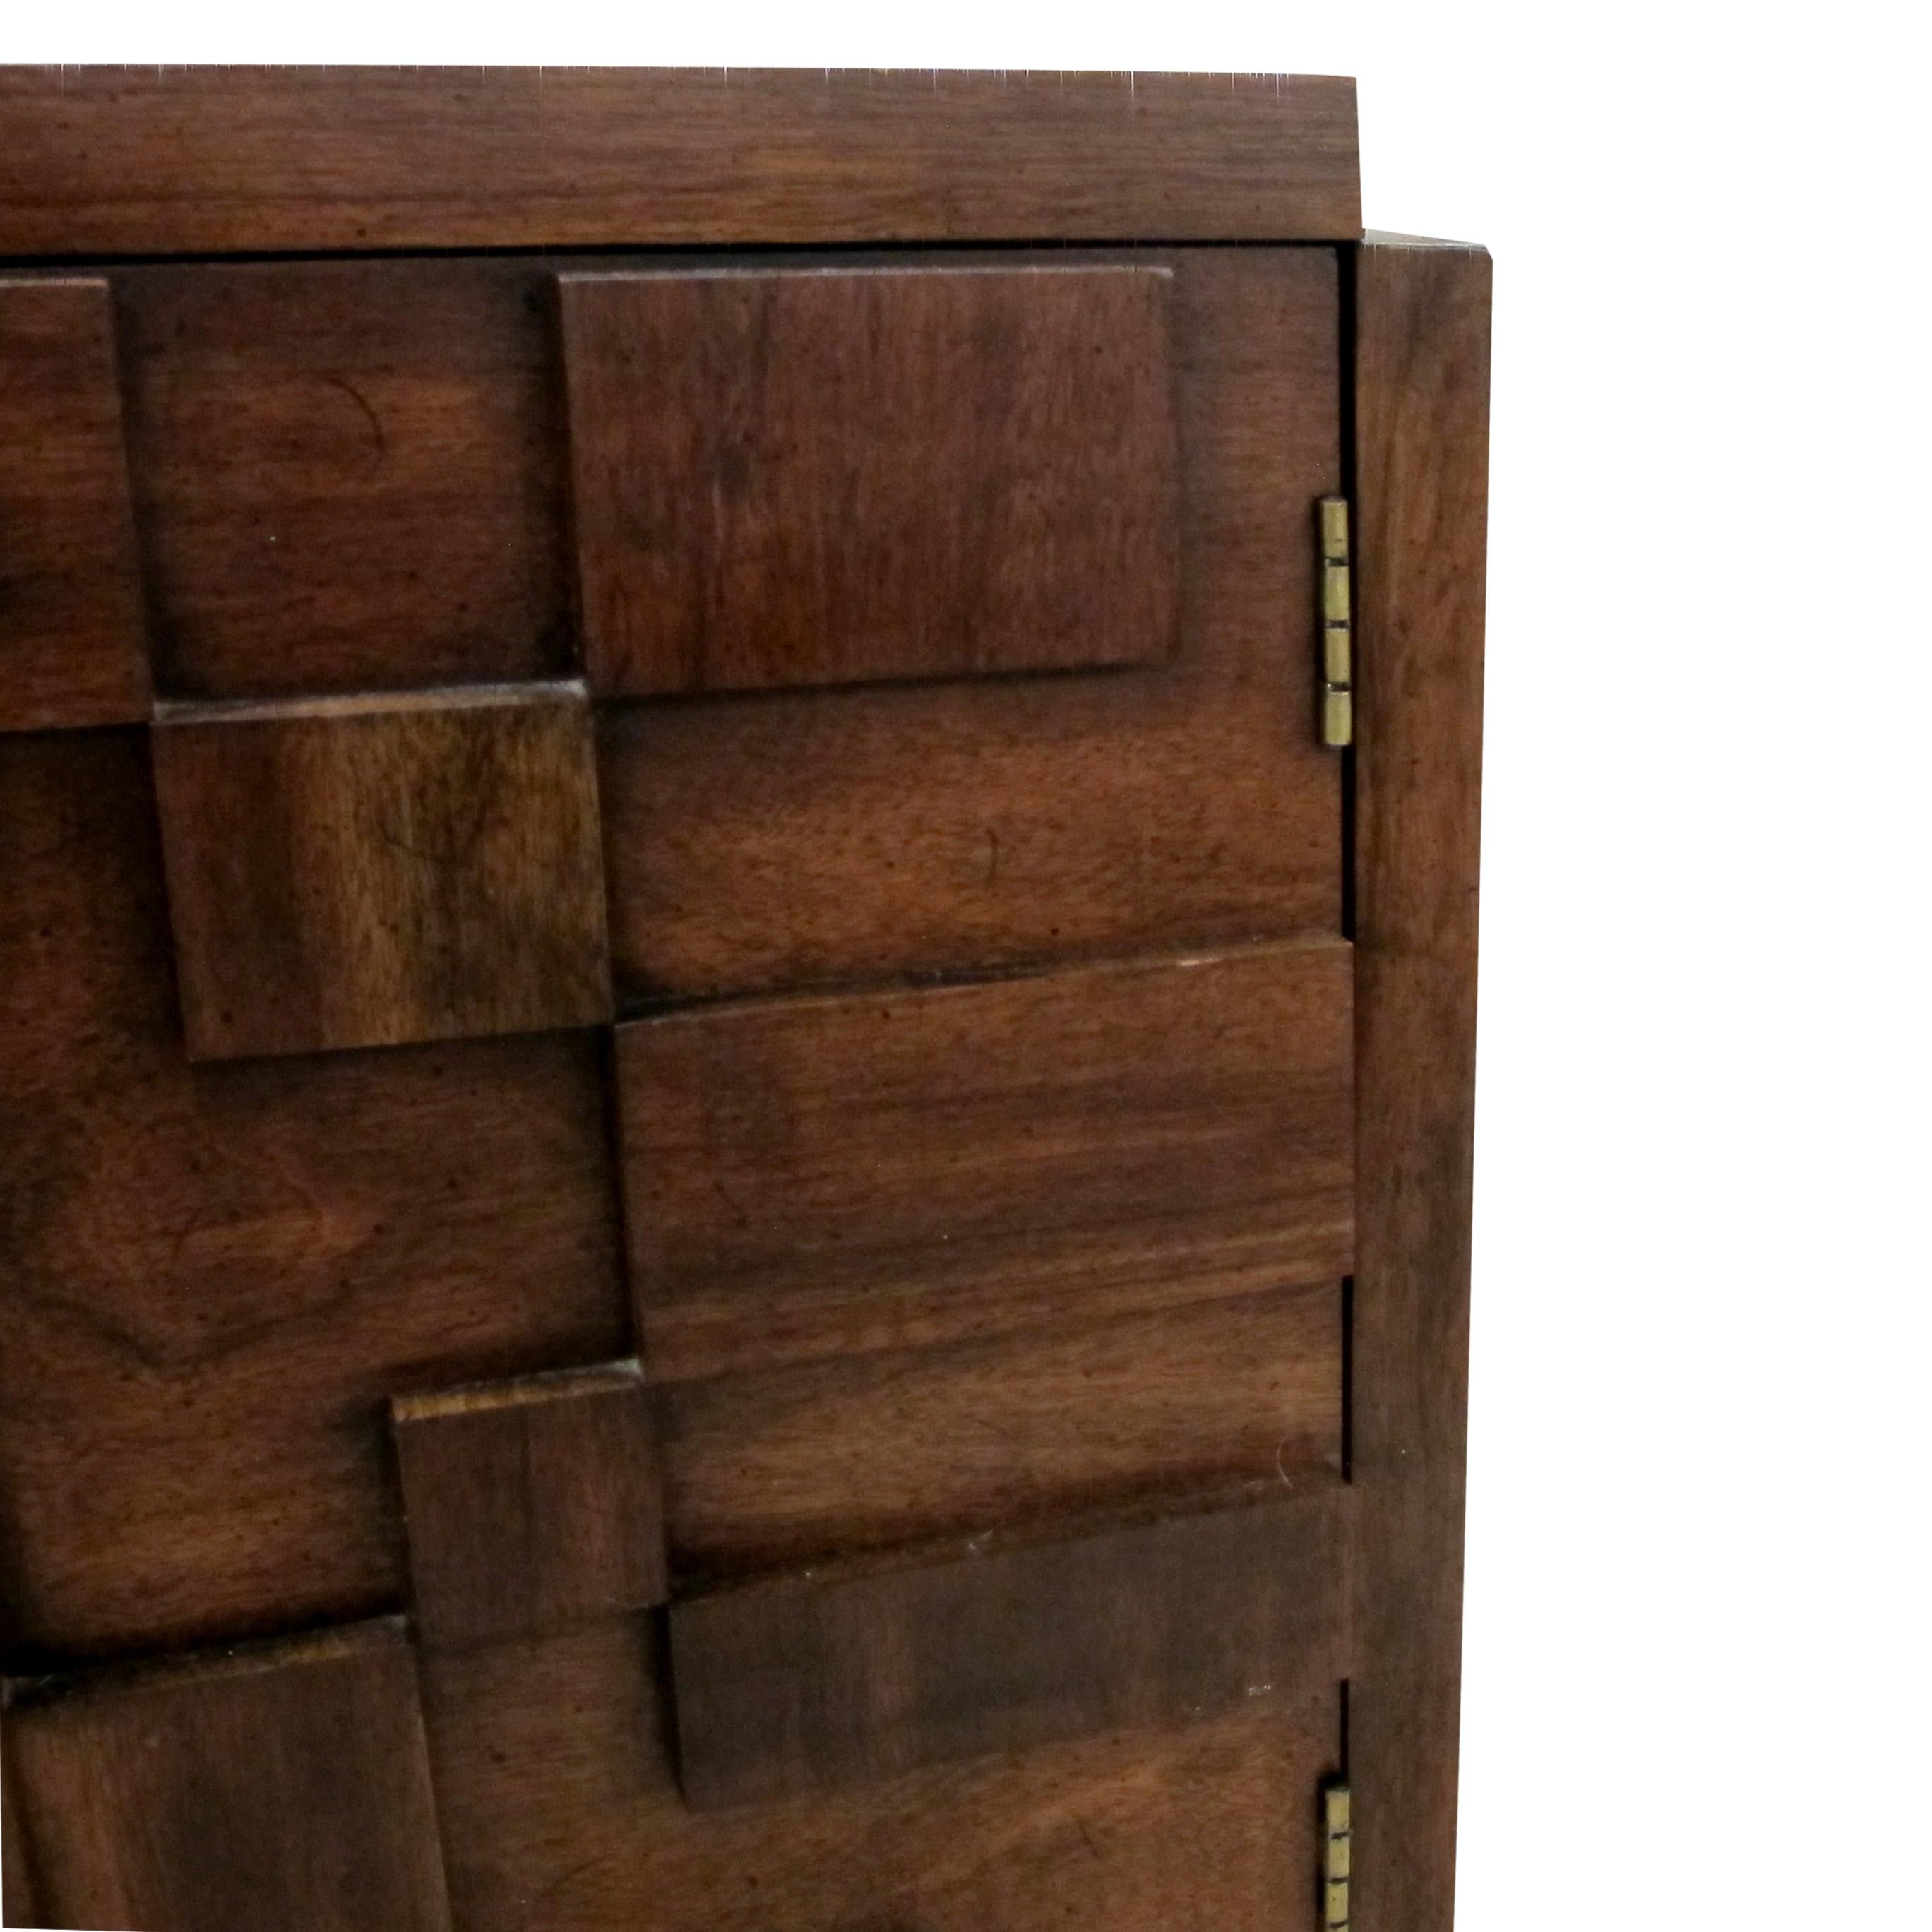 1960S Pair of “Brutalist” Walnut Staccato Paul Evans Bedside/End Tables by Lane For Sale 2